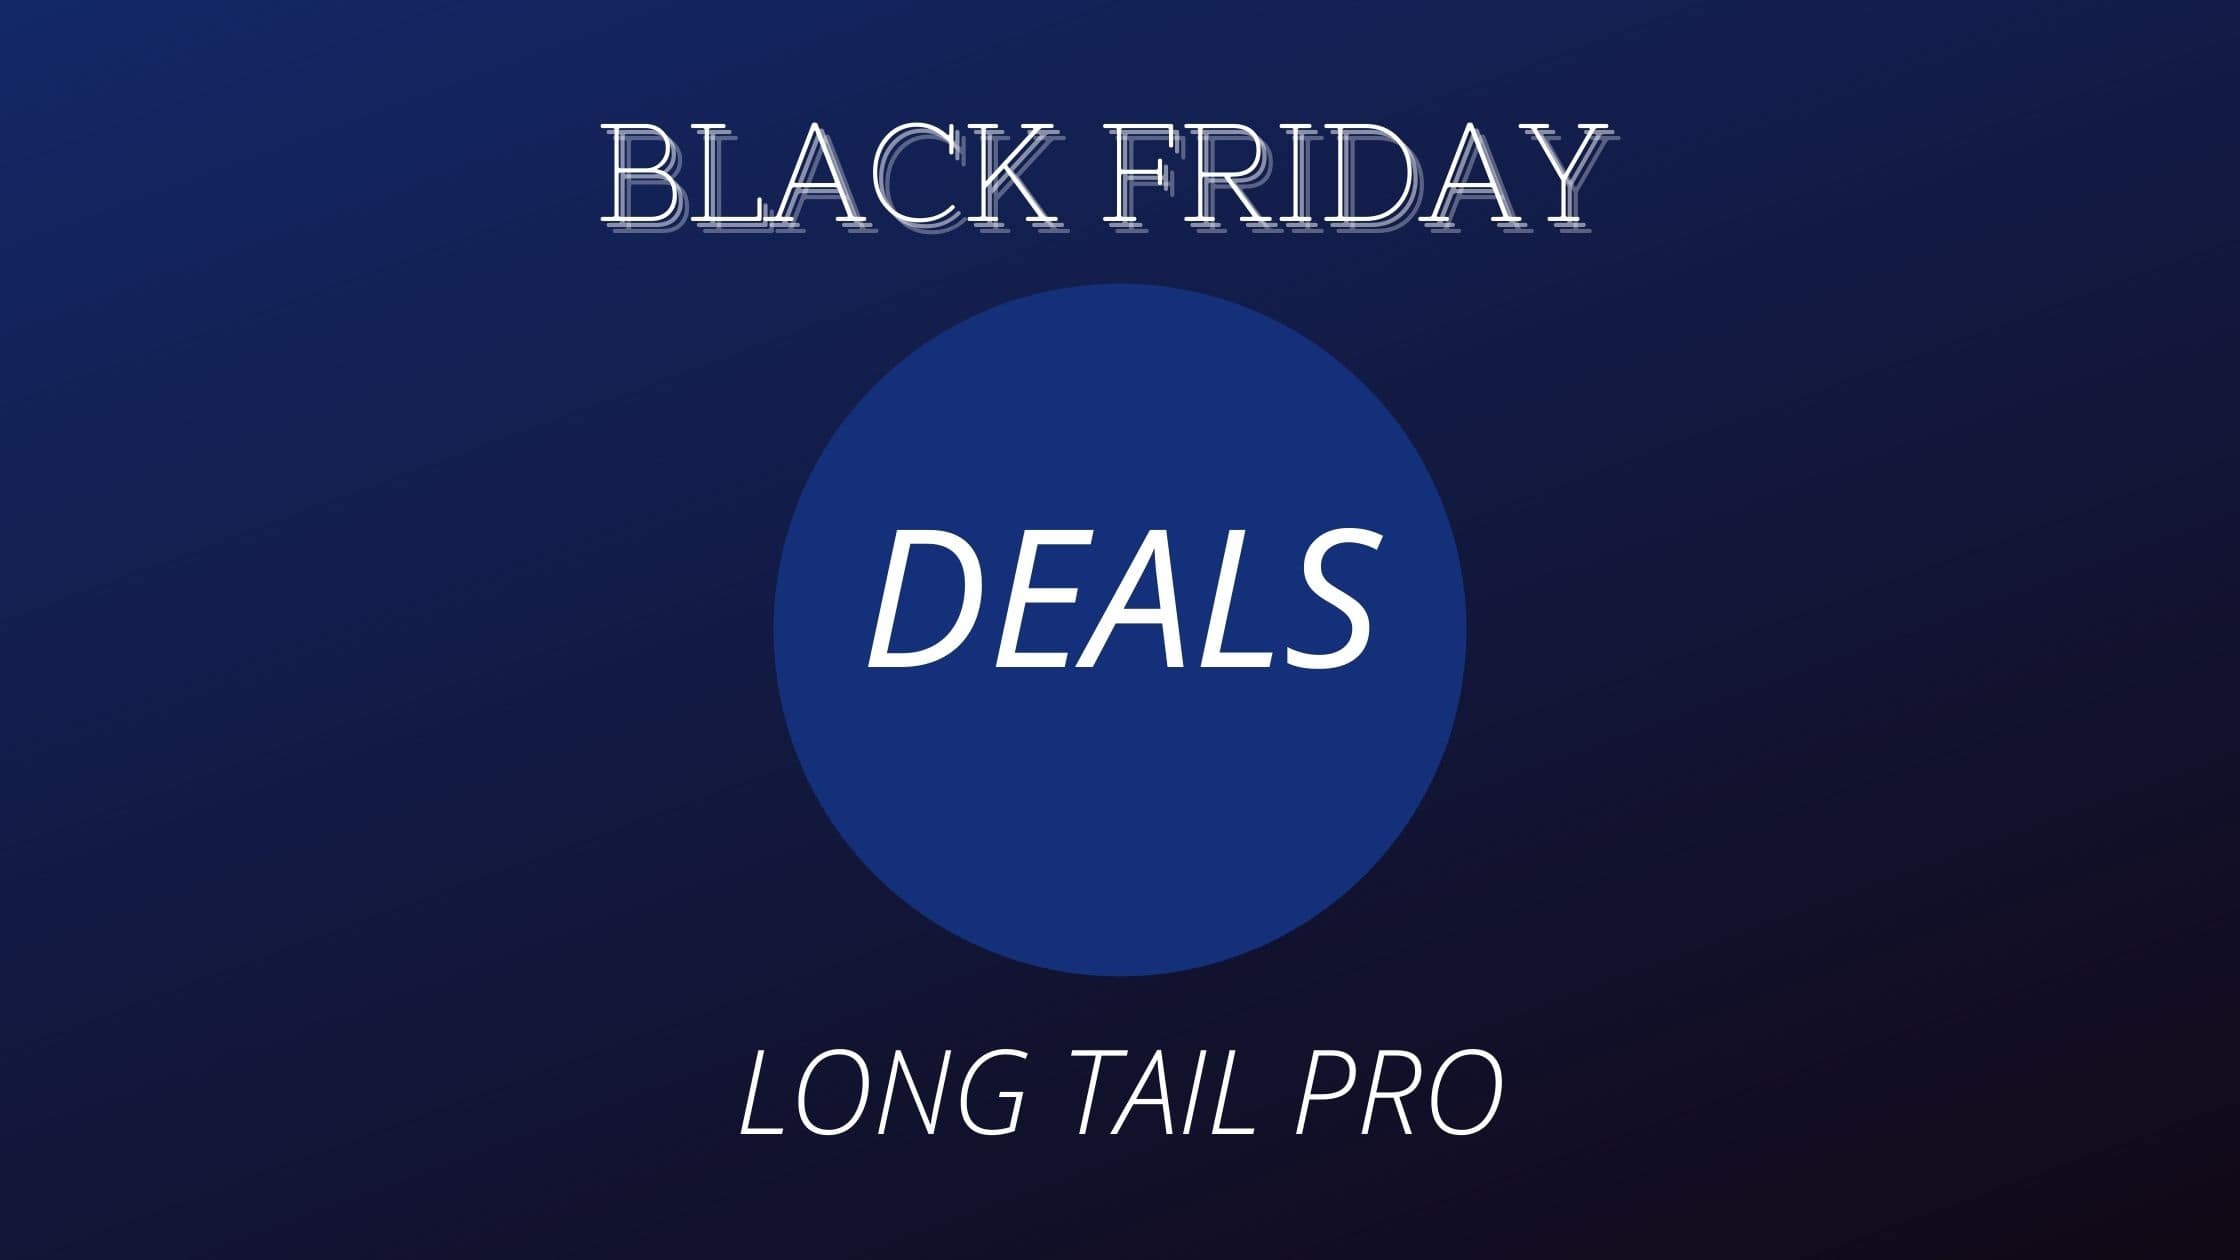 LongTail Pro Black Friday Deals 2021: Get Up to 50% Discount image